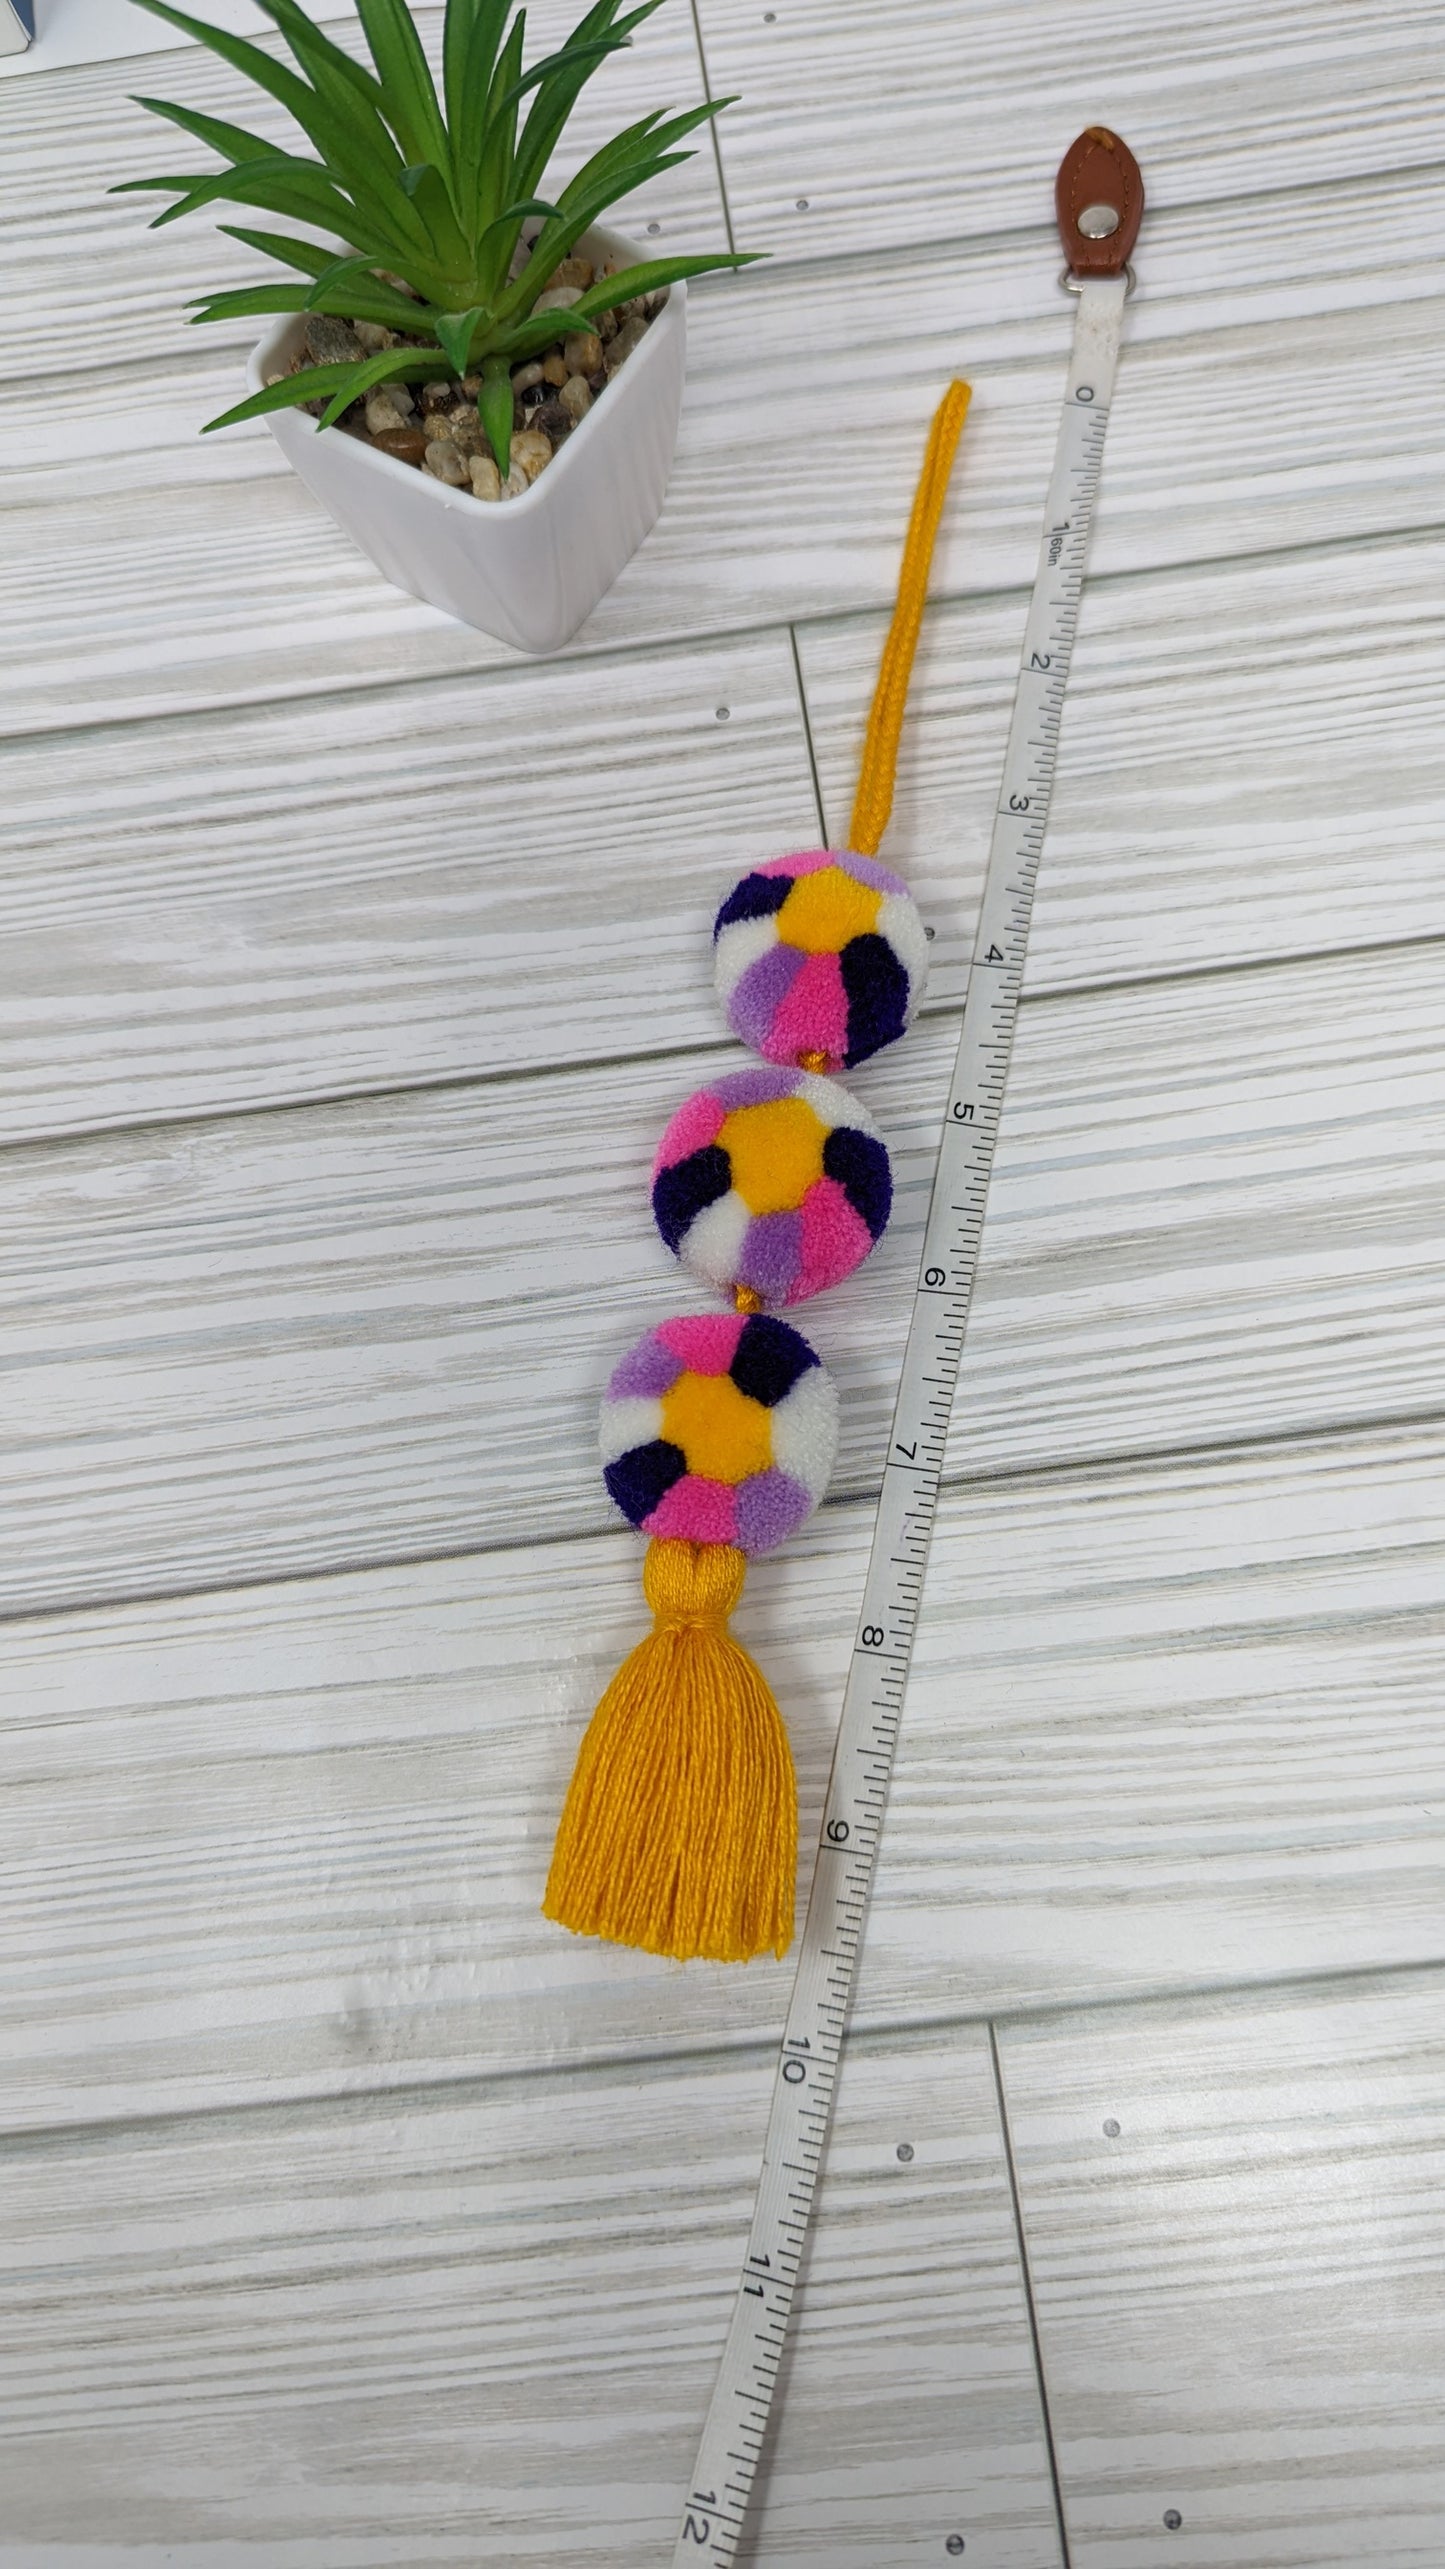 Guatemalan Artisan Pom Pom Tassel Decoration Charm for Bags, rear mirror, keychains and more